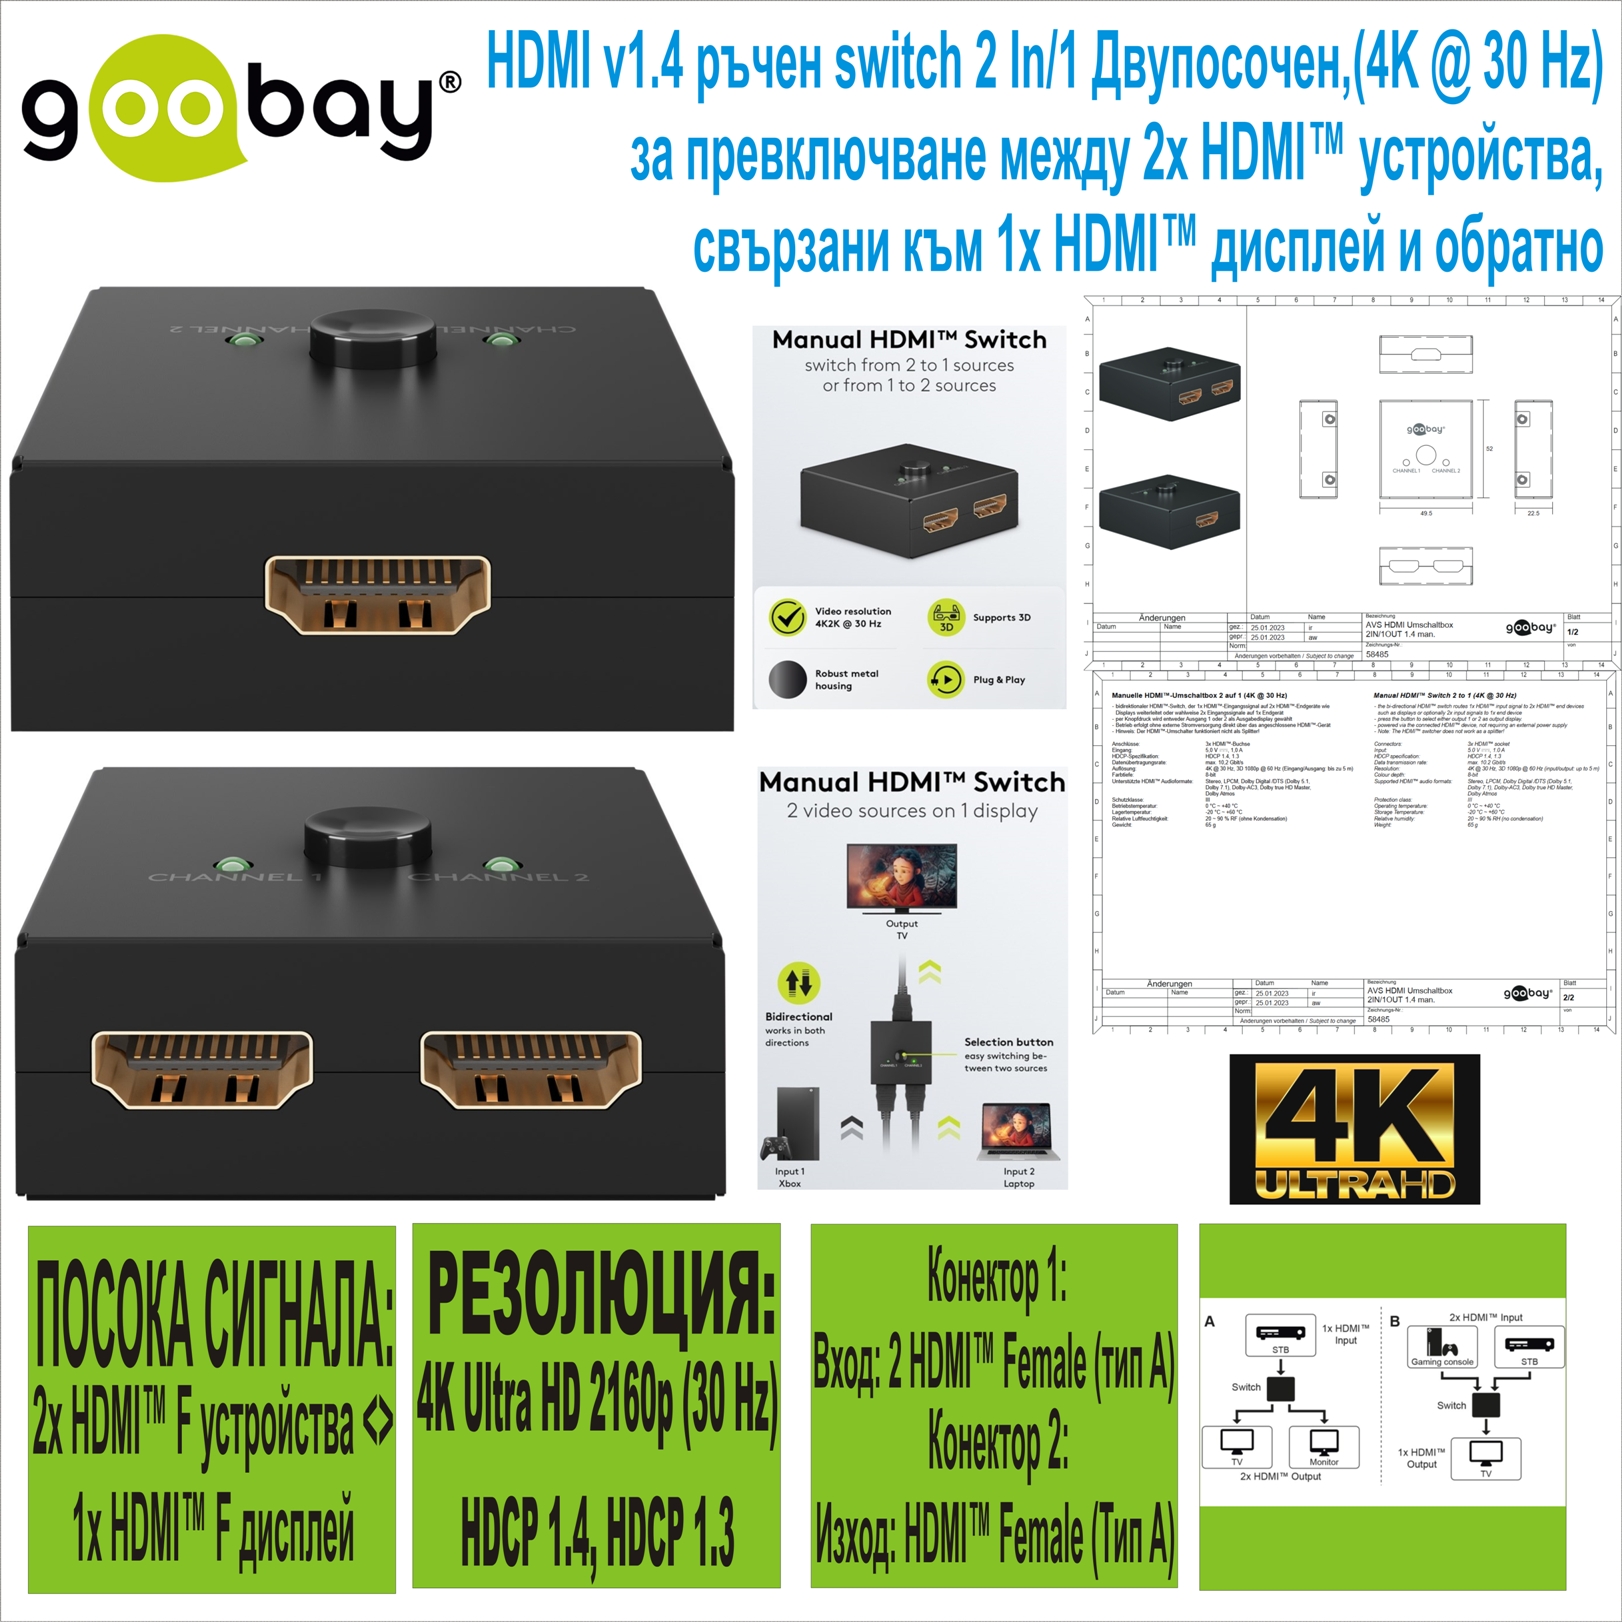 HDMI Switch 2 to 1 Двупосочен Goobay  58485